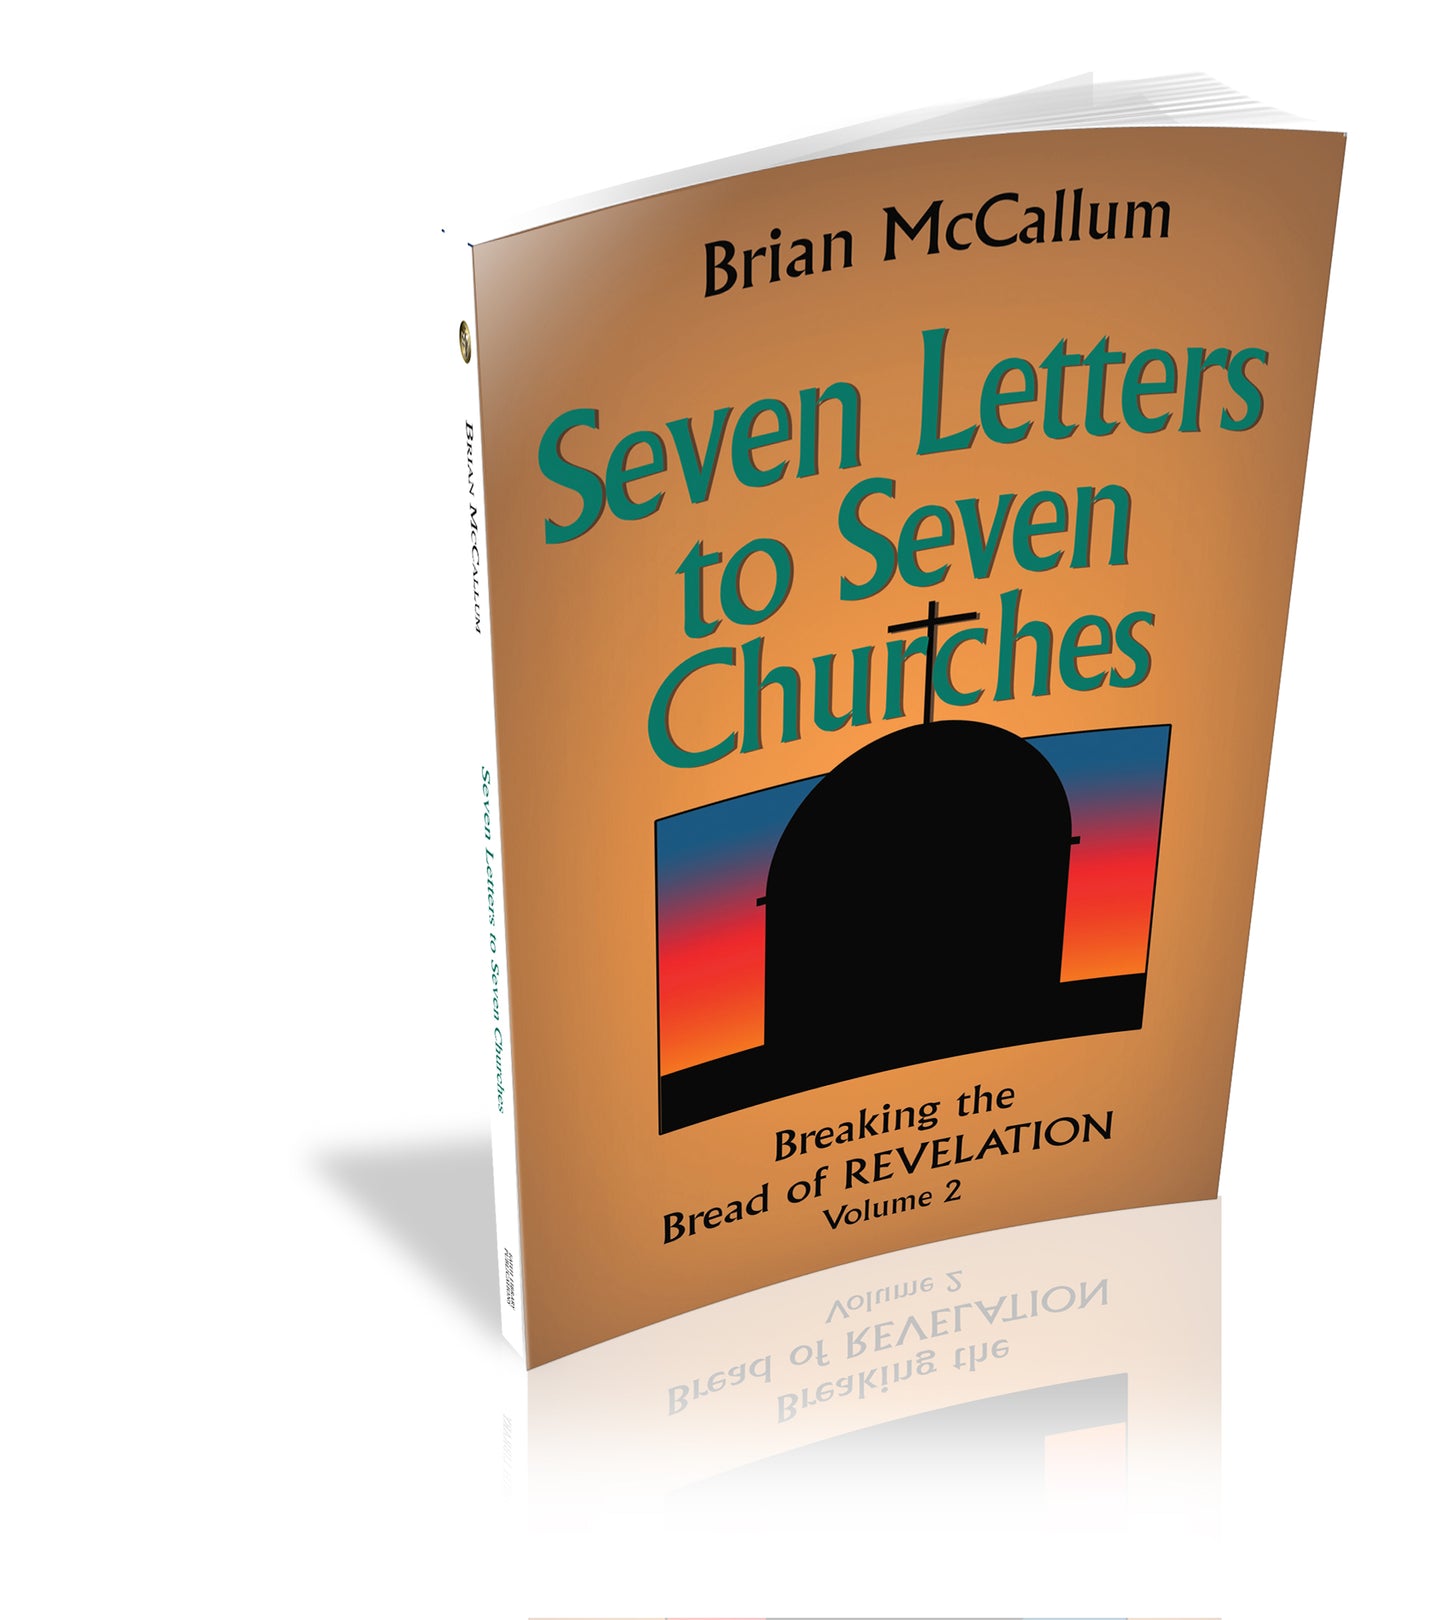 Breaking the Bread of Revelation: Volume 2—Seven Letters to Seven Churches (Book)